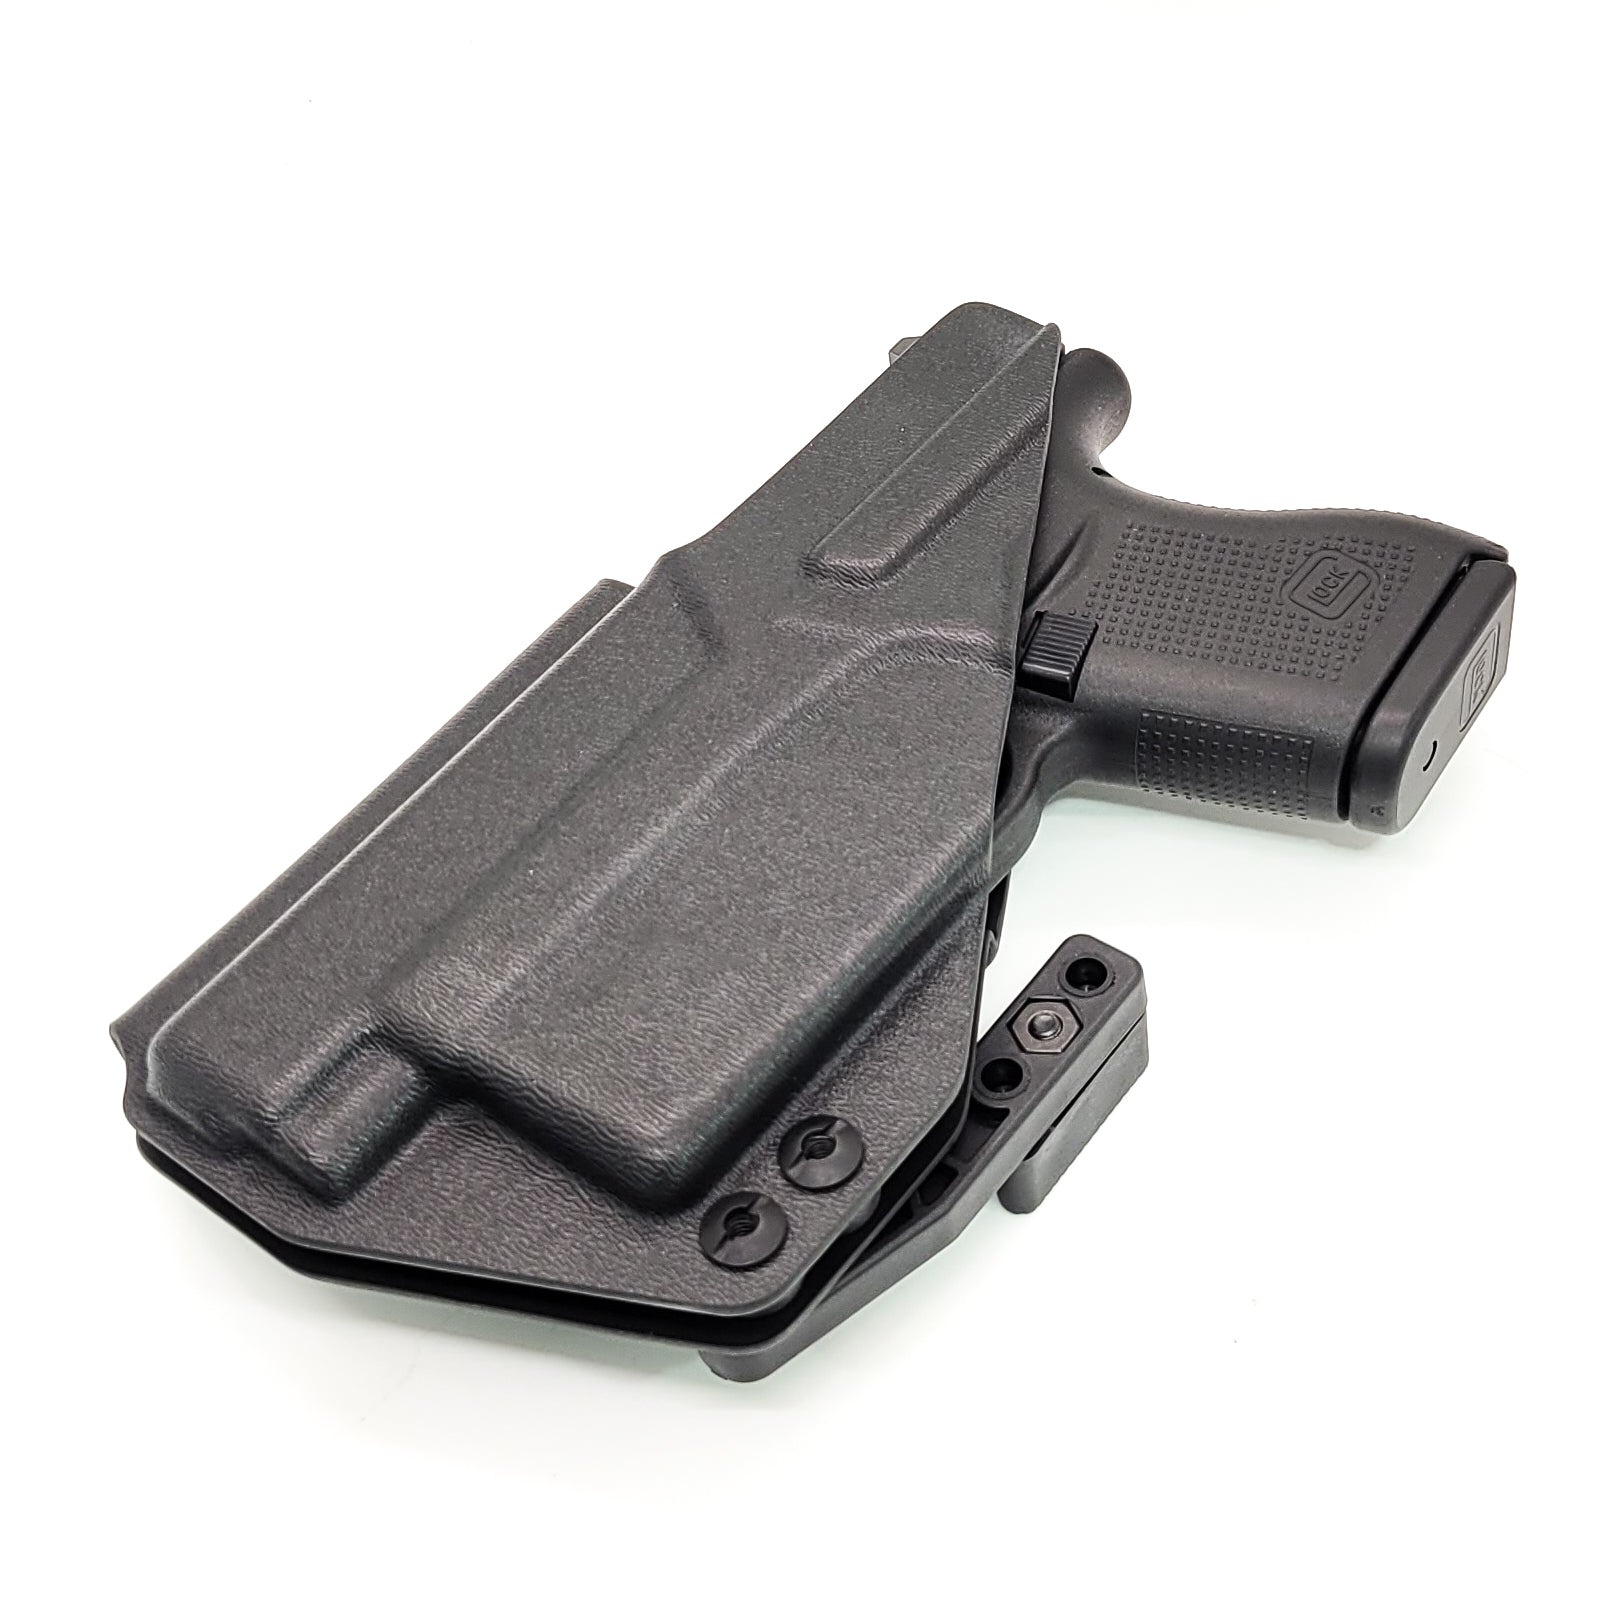 For the best, Inside Waistband IWB AIWB Kydex Holster designed to fit the Glock 43, 43X, or 48 with the Nightstick TSM-11W Weapon Mounted light, shop Four Brothers Holsters. Full sweat guard, adjustable retention, minimal material & smooth edges to reduce printing. Made in the USA. Cleared for red dot sights. 4Bros